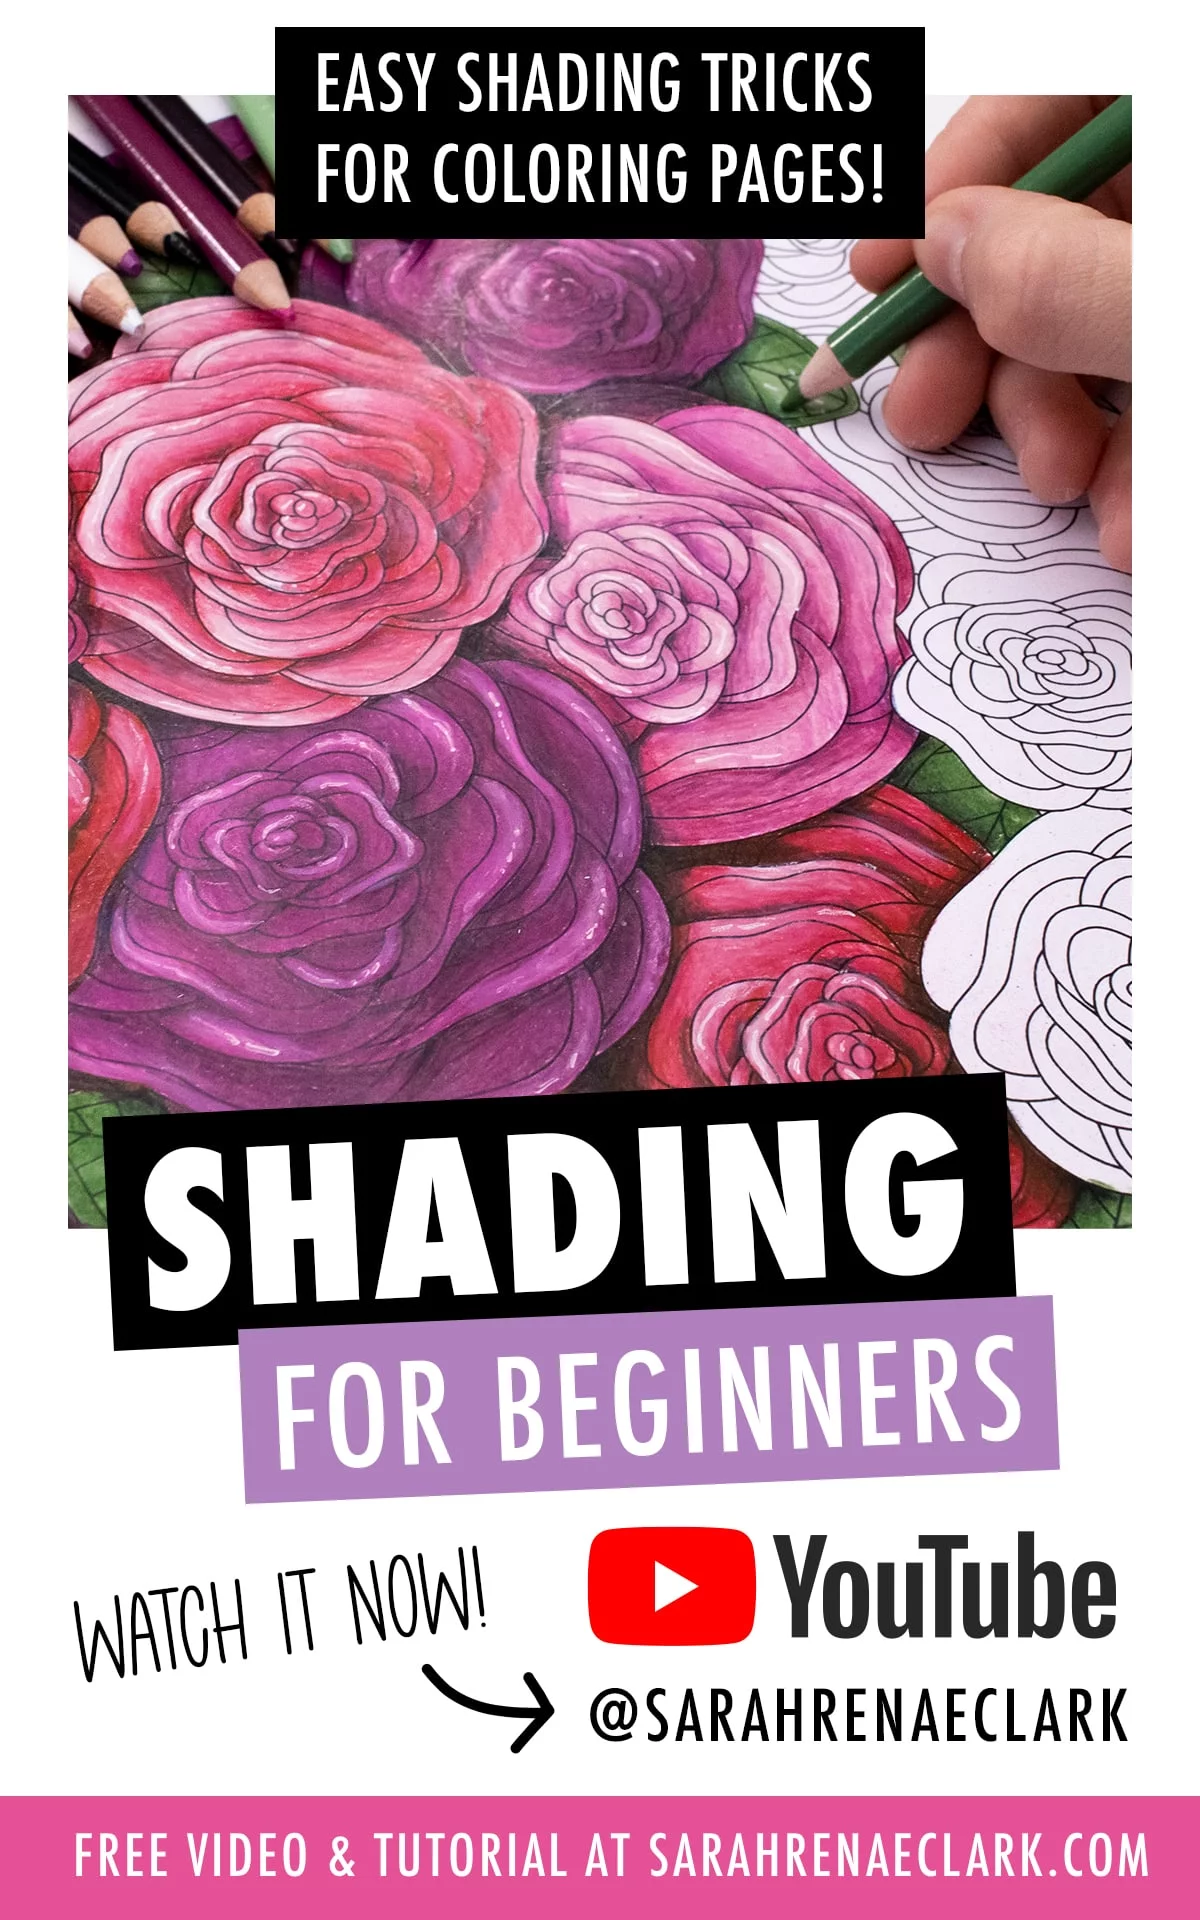 Advanced Shading Techniques for Adult Coloring Books (How to Draw Shadows,  Part 2)